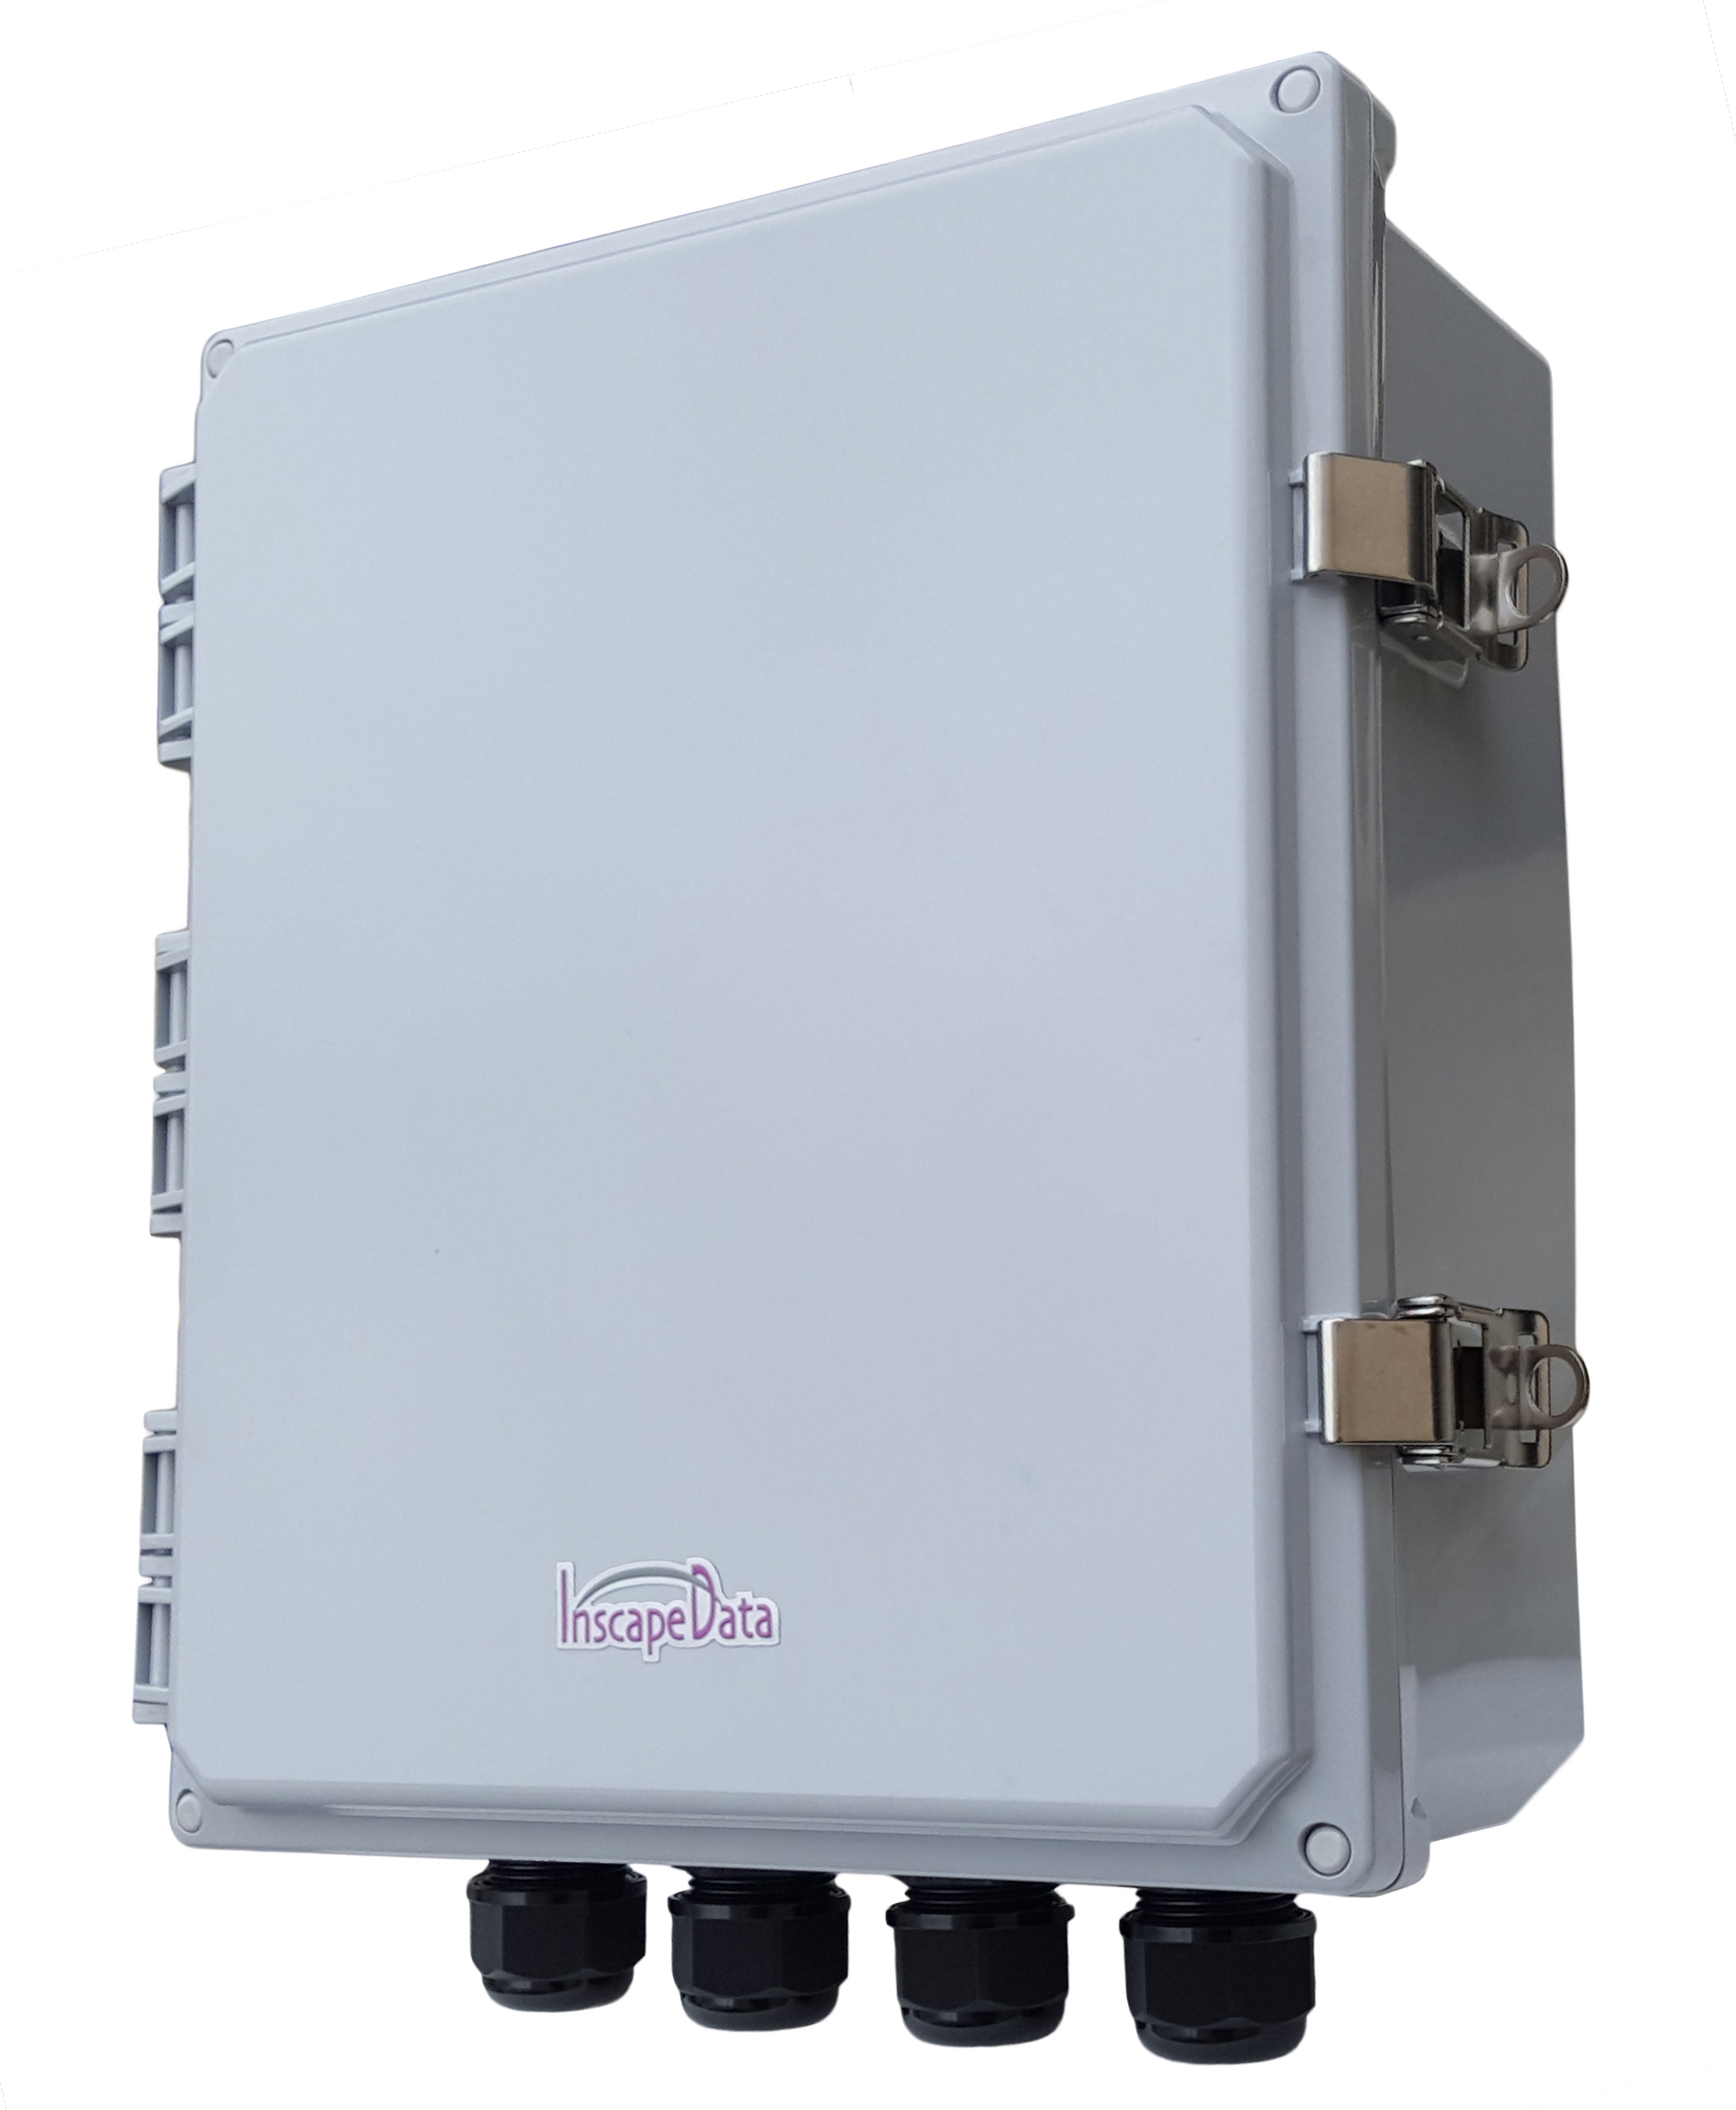 LPS3000-T1 Managed Outdoor Gigabit PoE Switch | Inscape Data Corporation